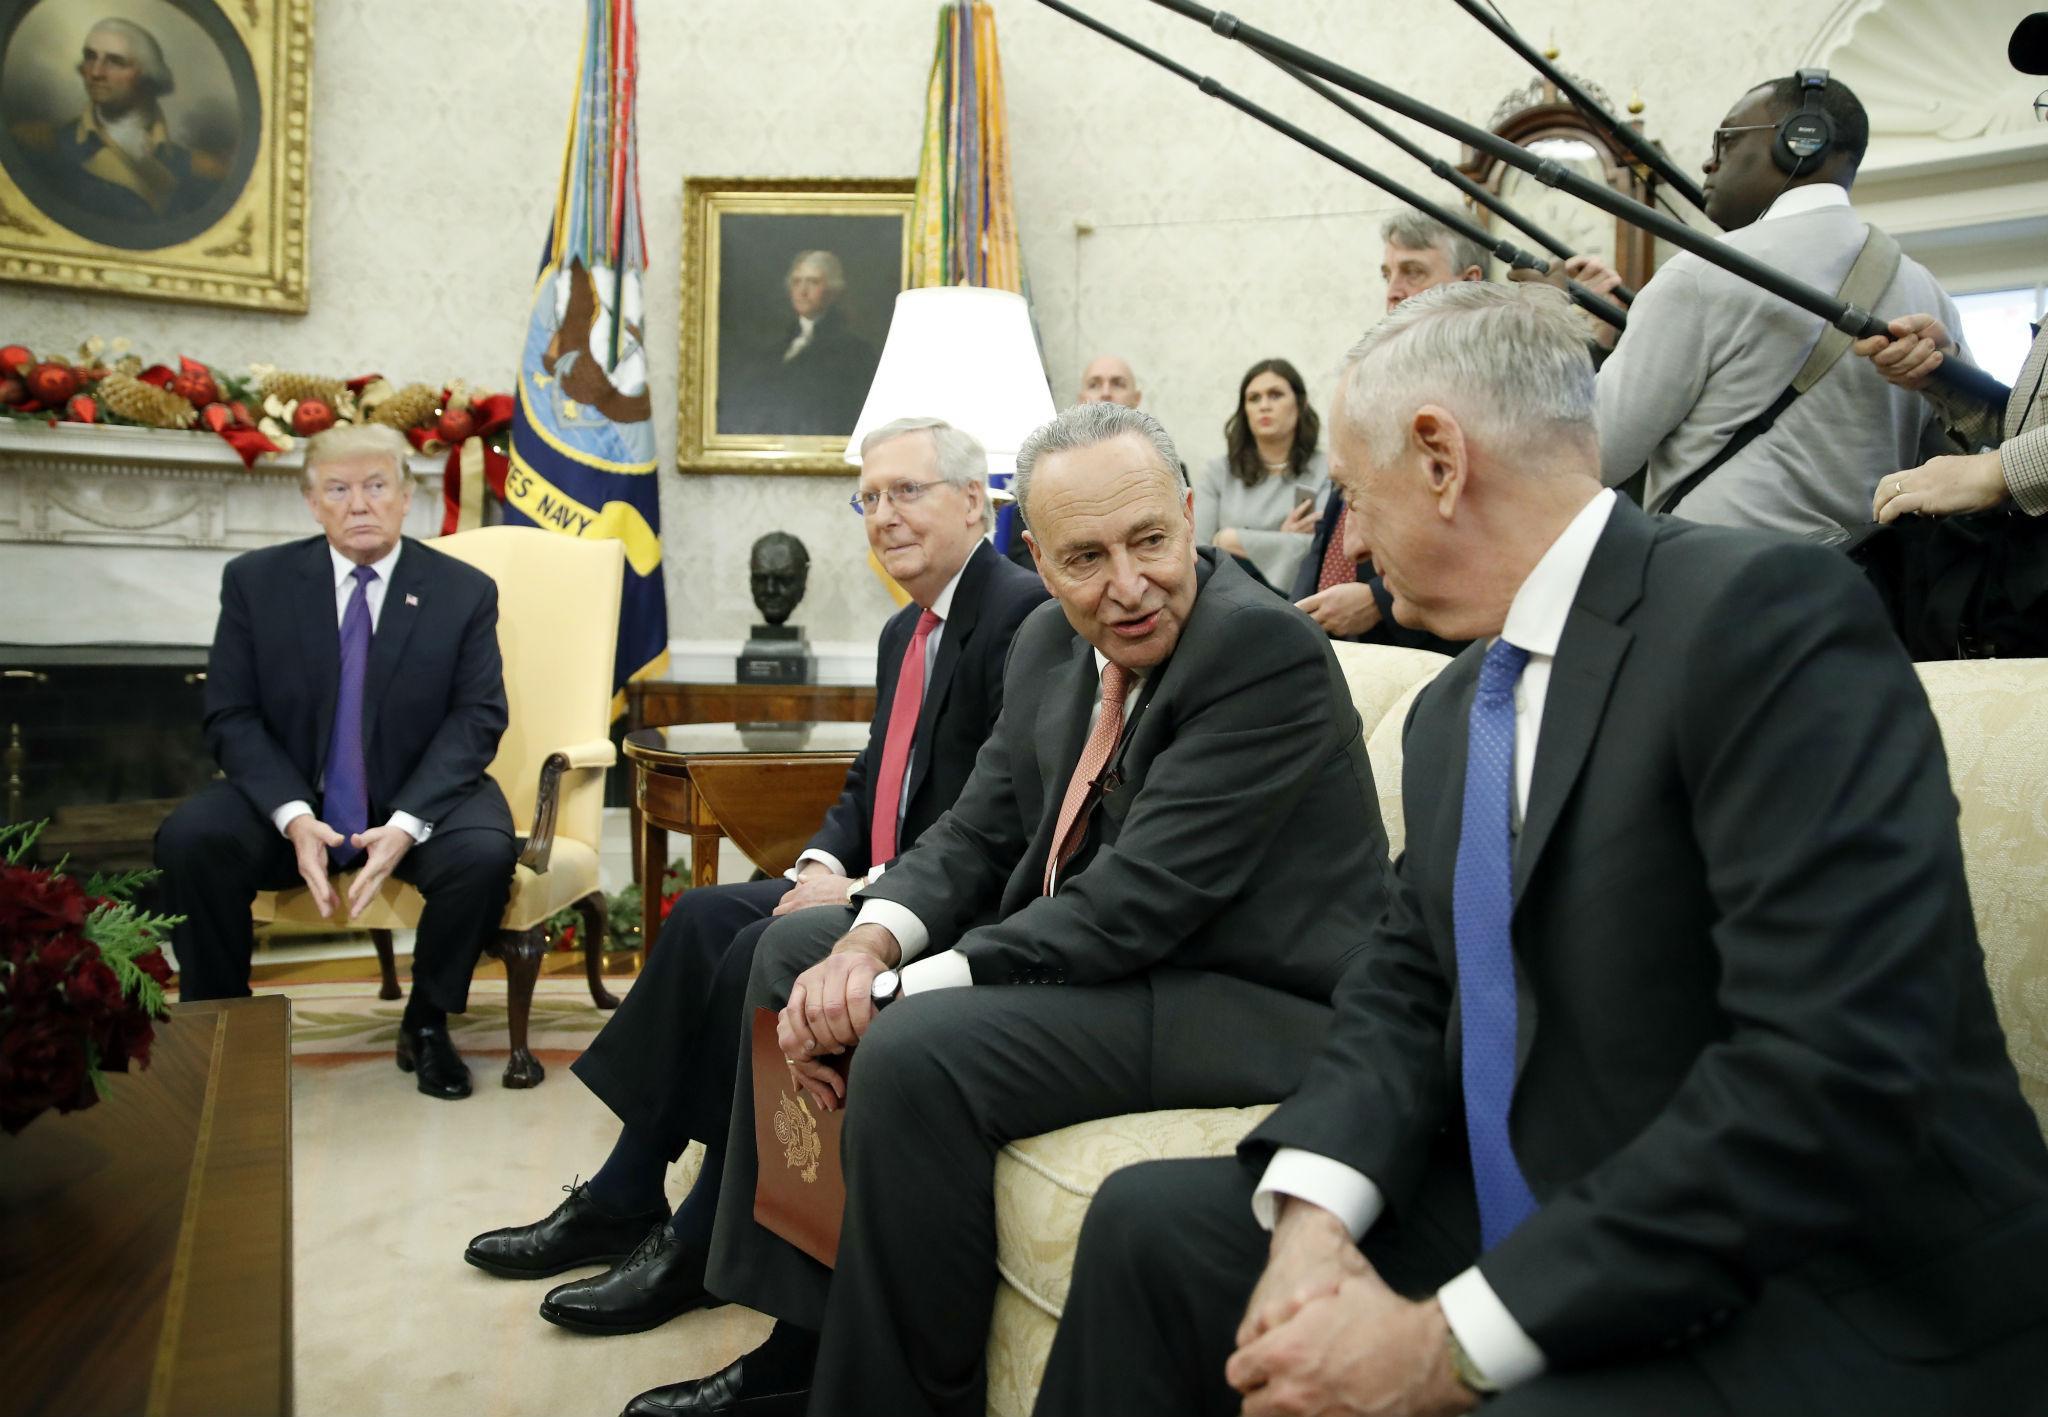 President Donald Trump met with congressional leaders to discuss a host of issues, including government funding